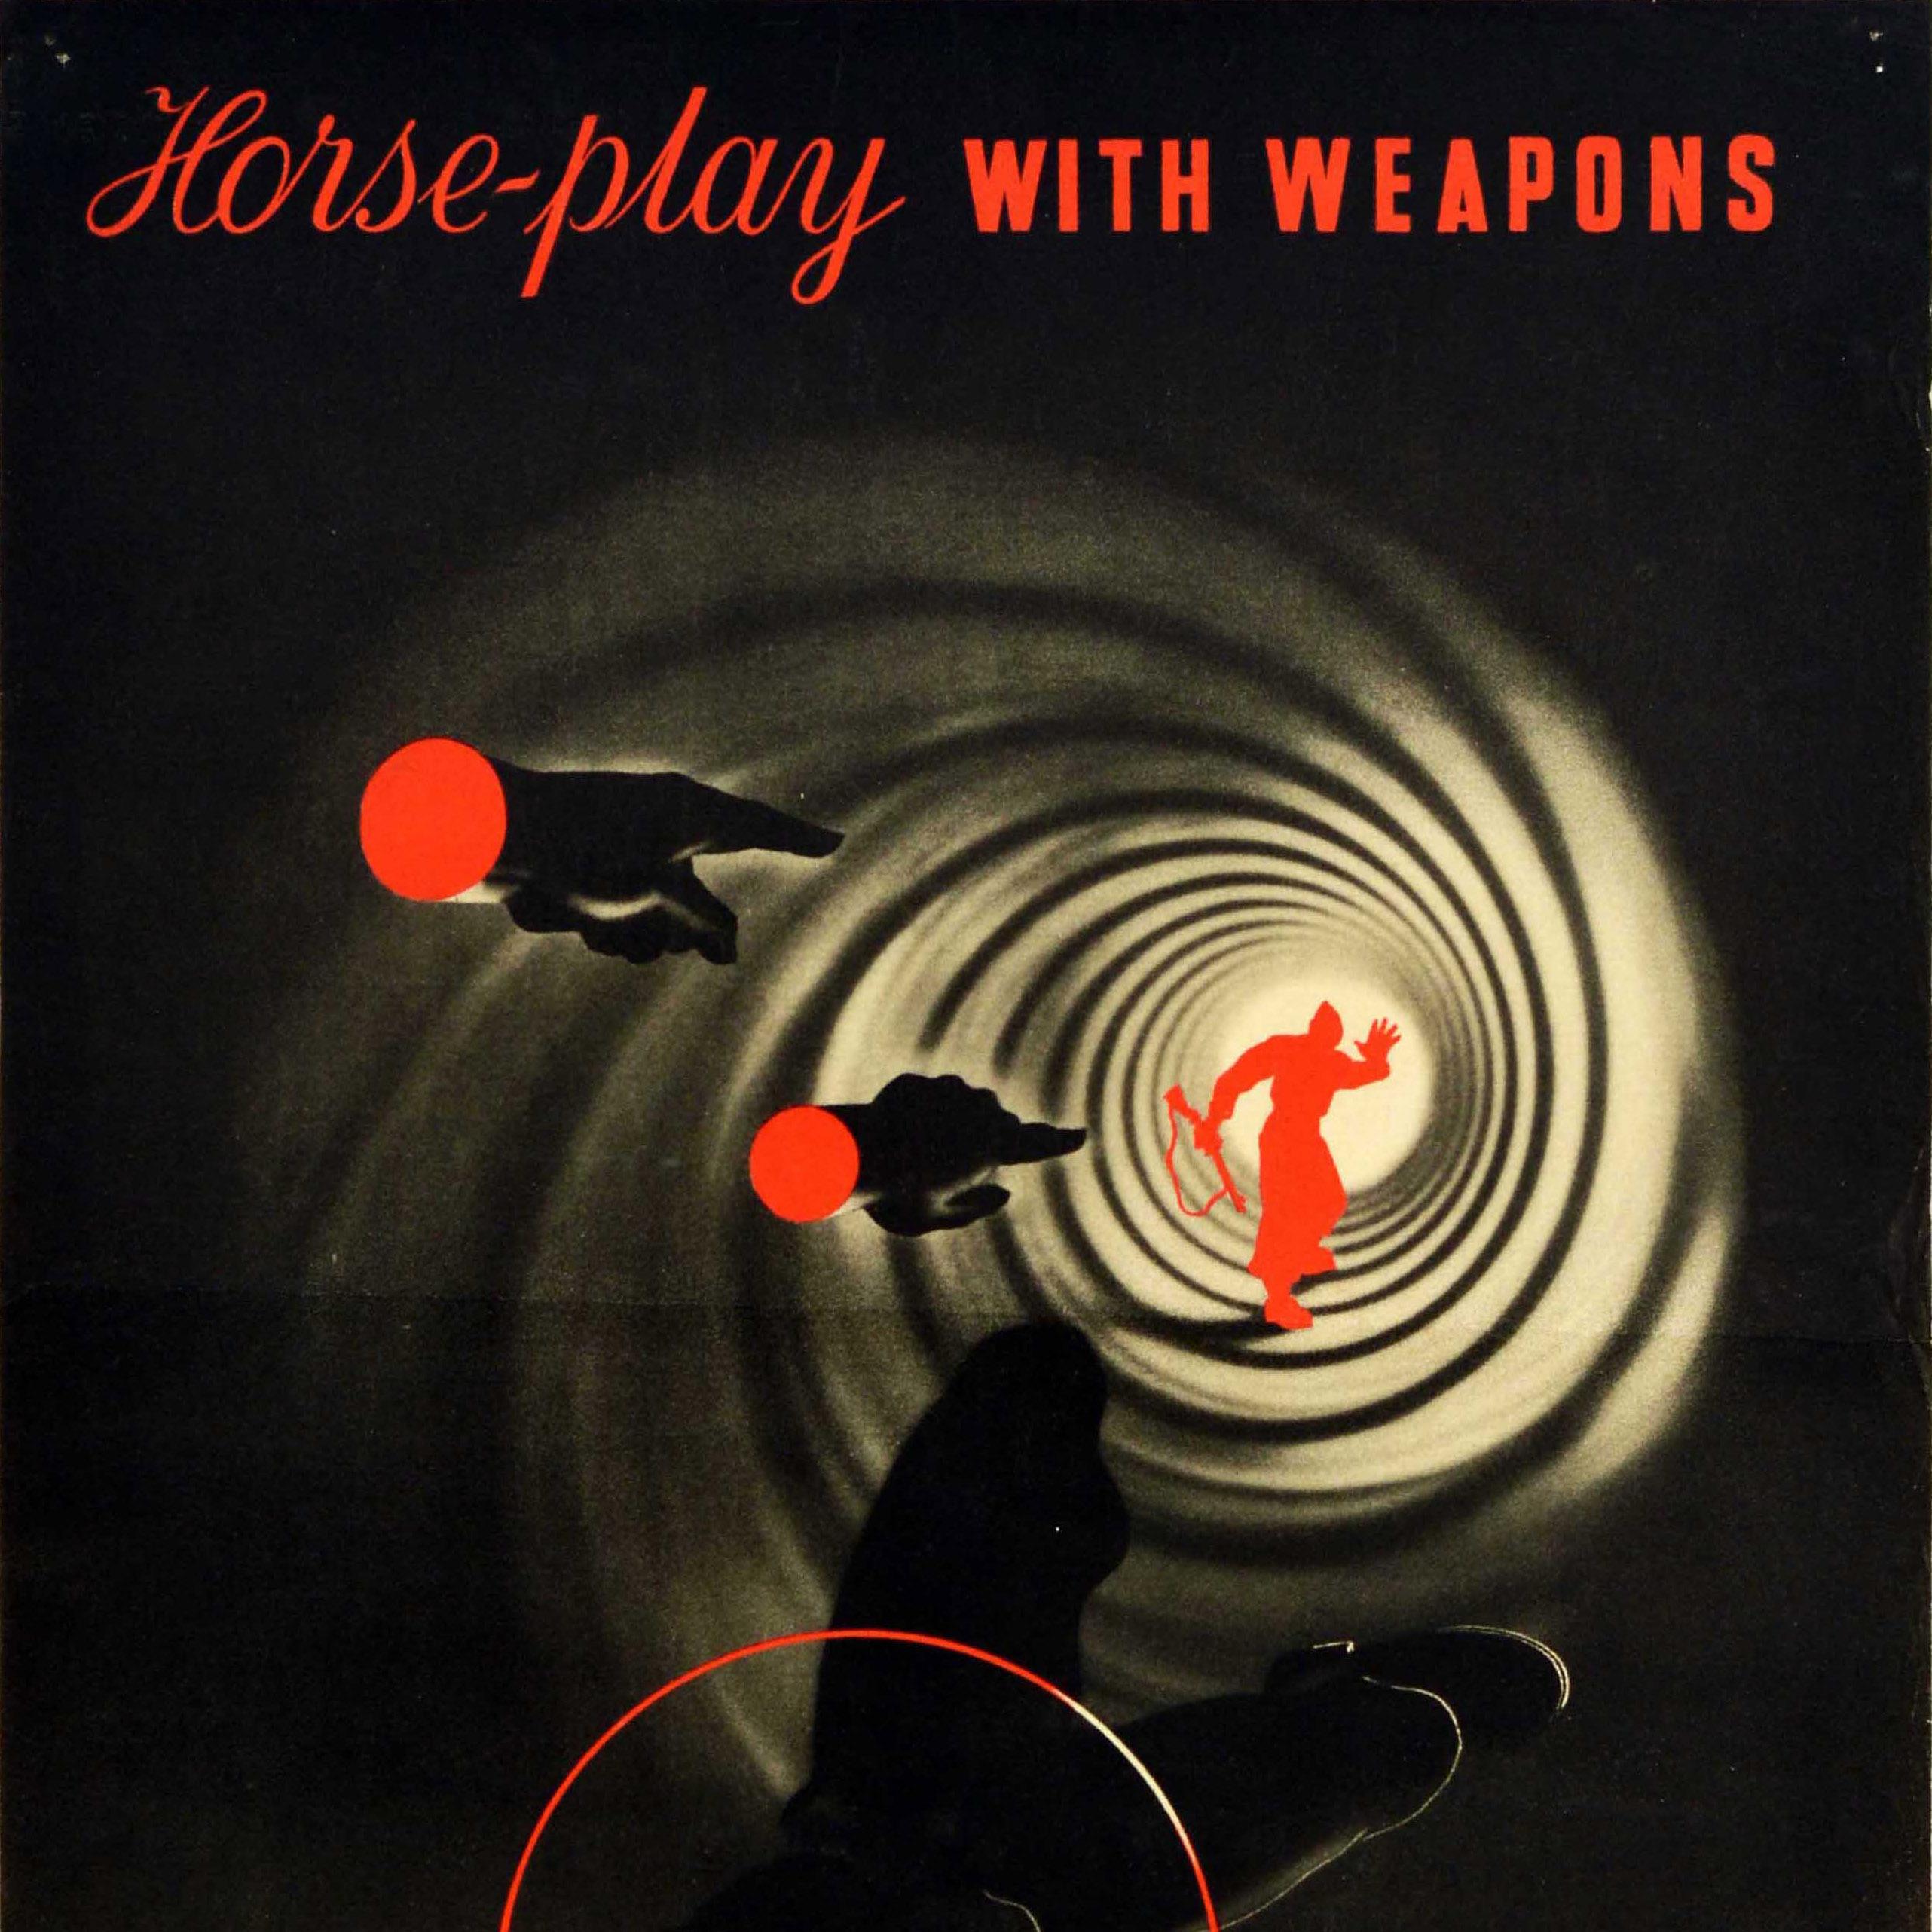 Original Vintage World War Two Safety Poster Horse Play With Weapons WWII Games - Noir Print par Abram Games